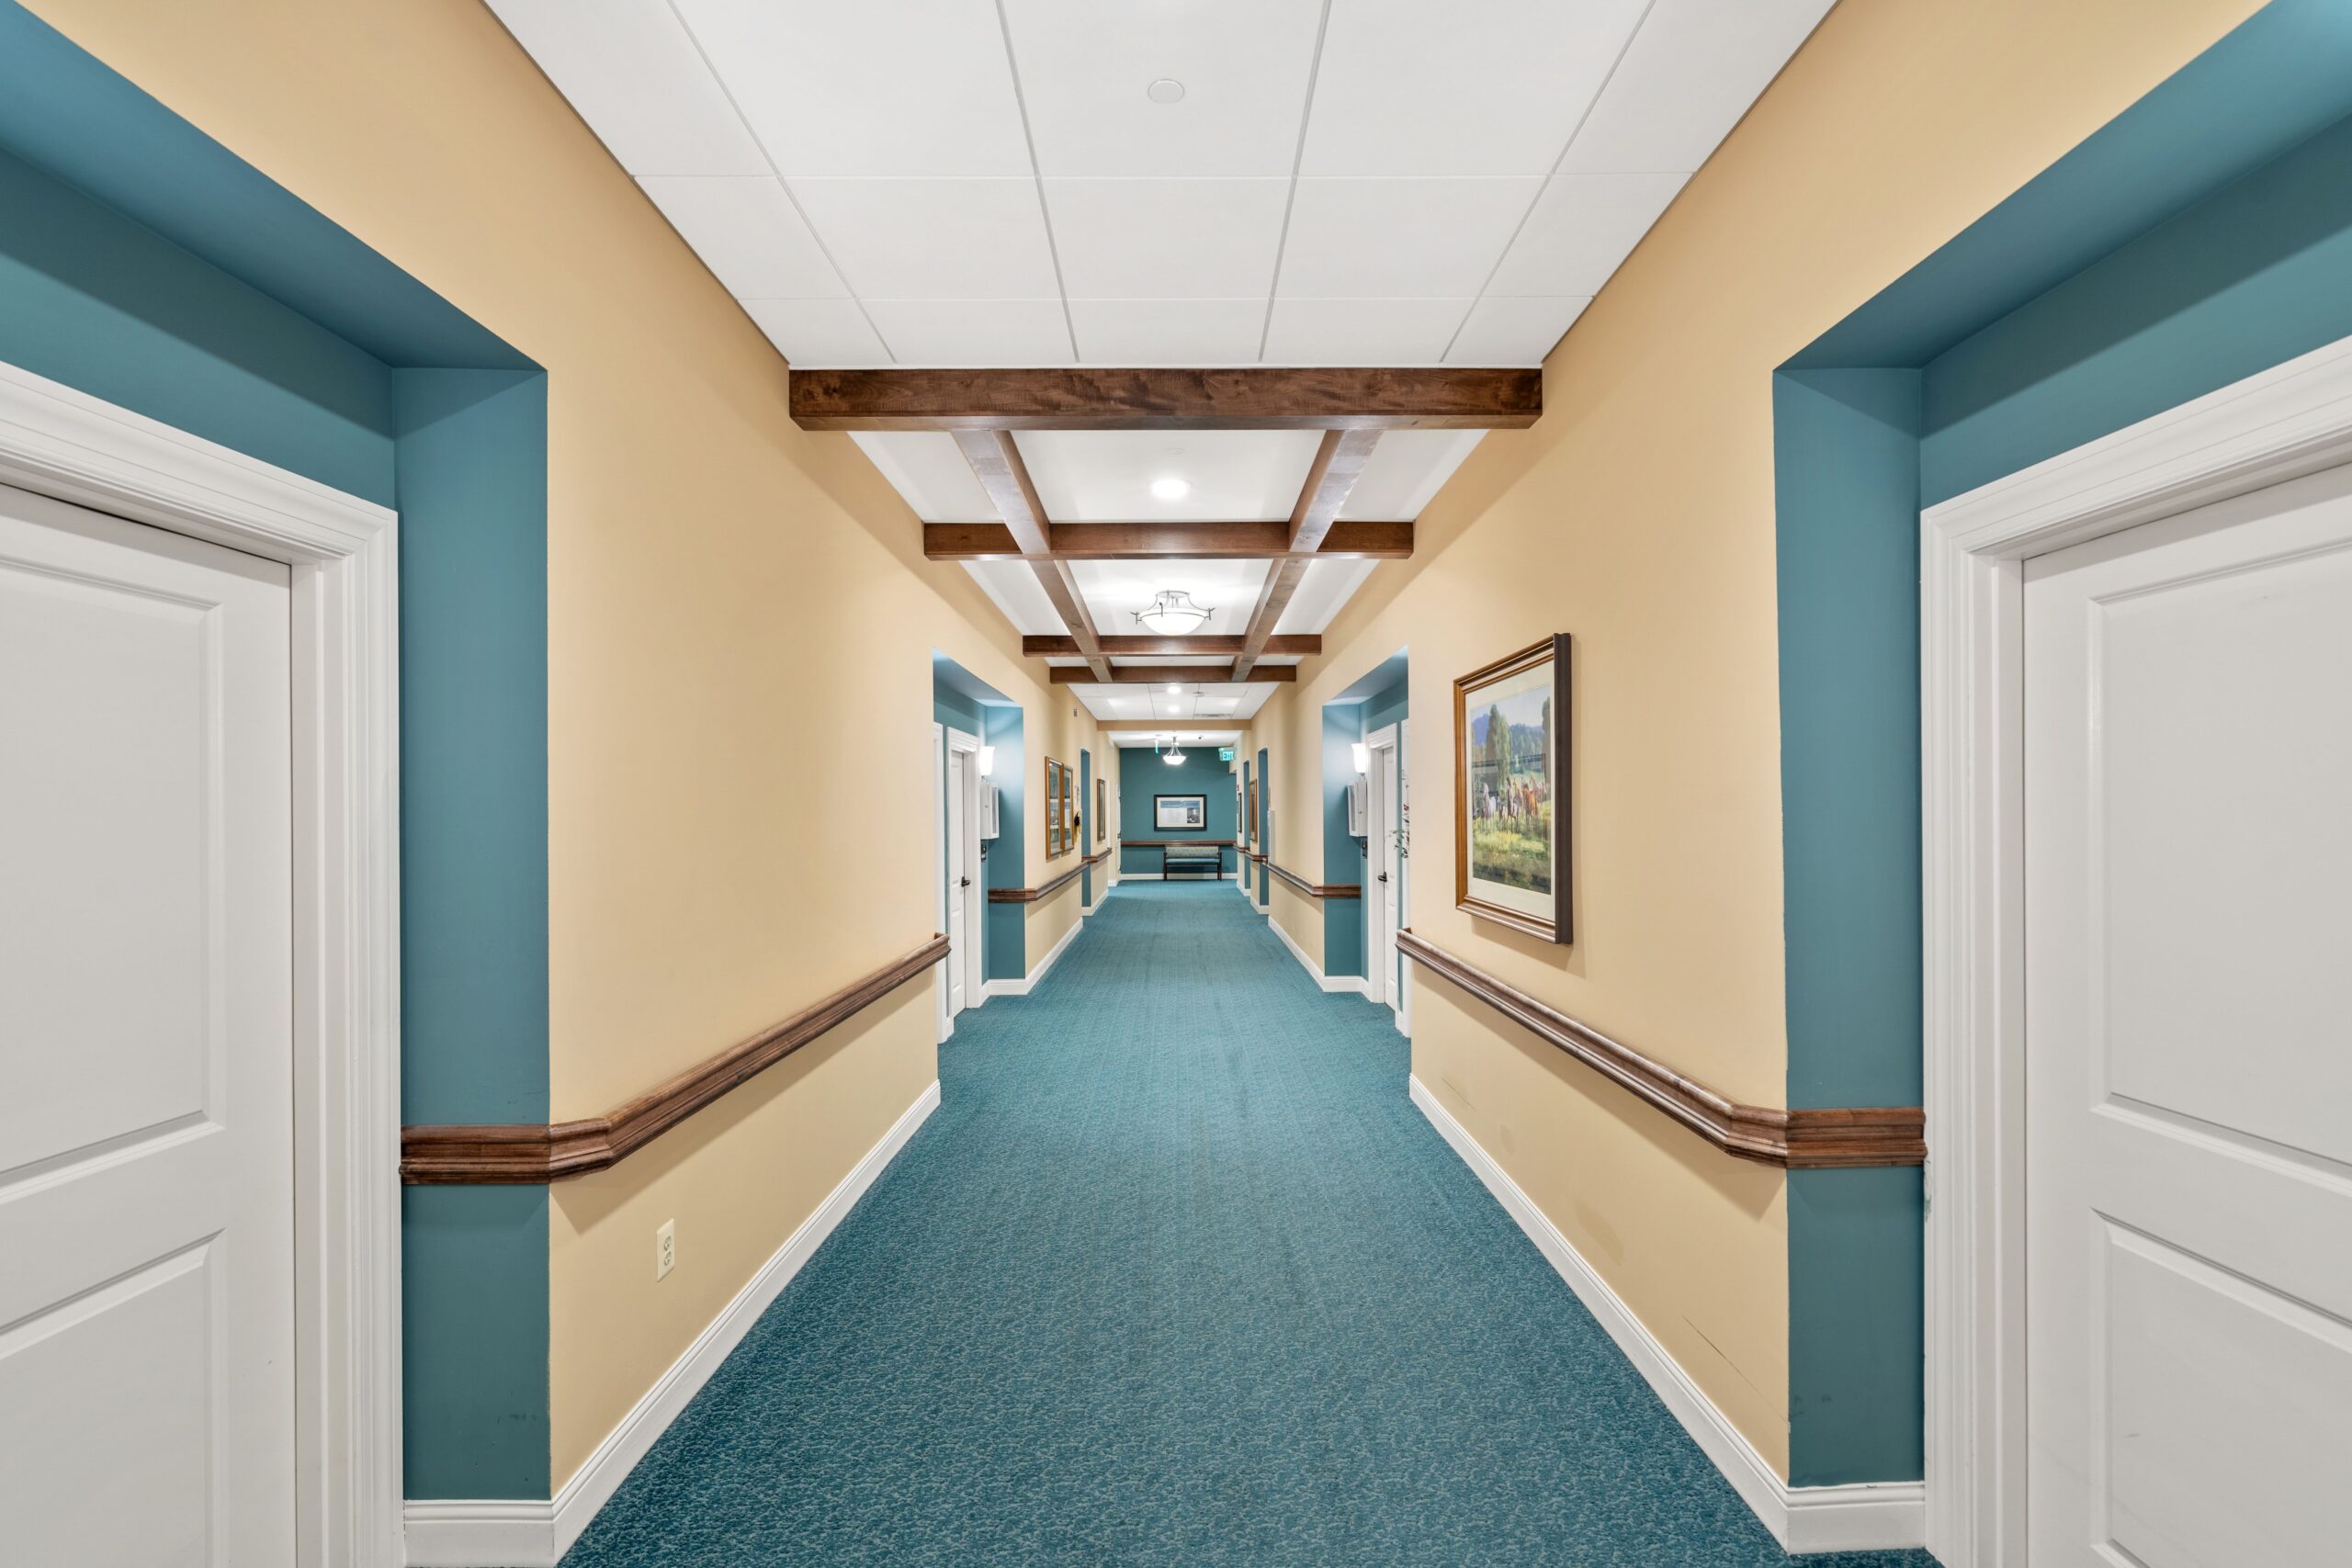 Long blue hallway with wooden beams